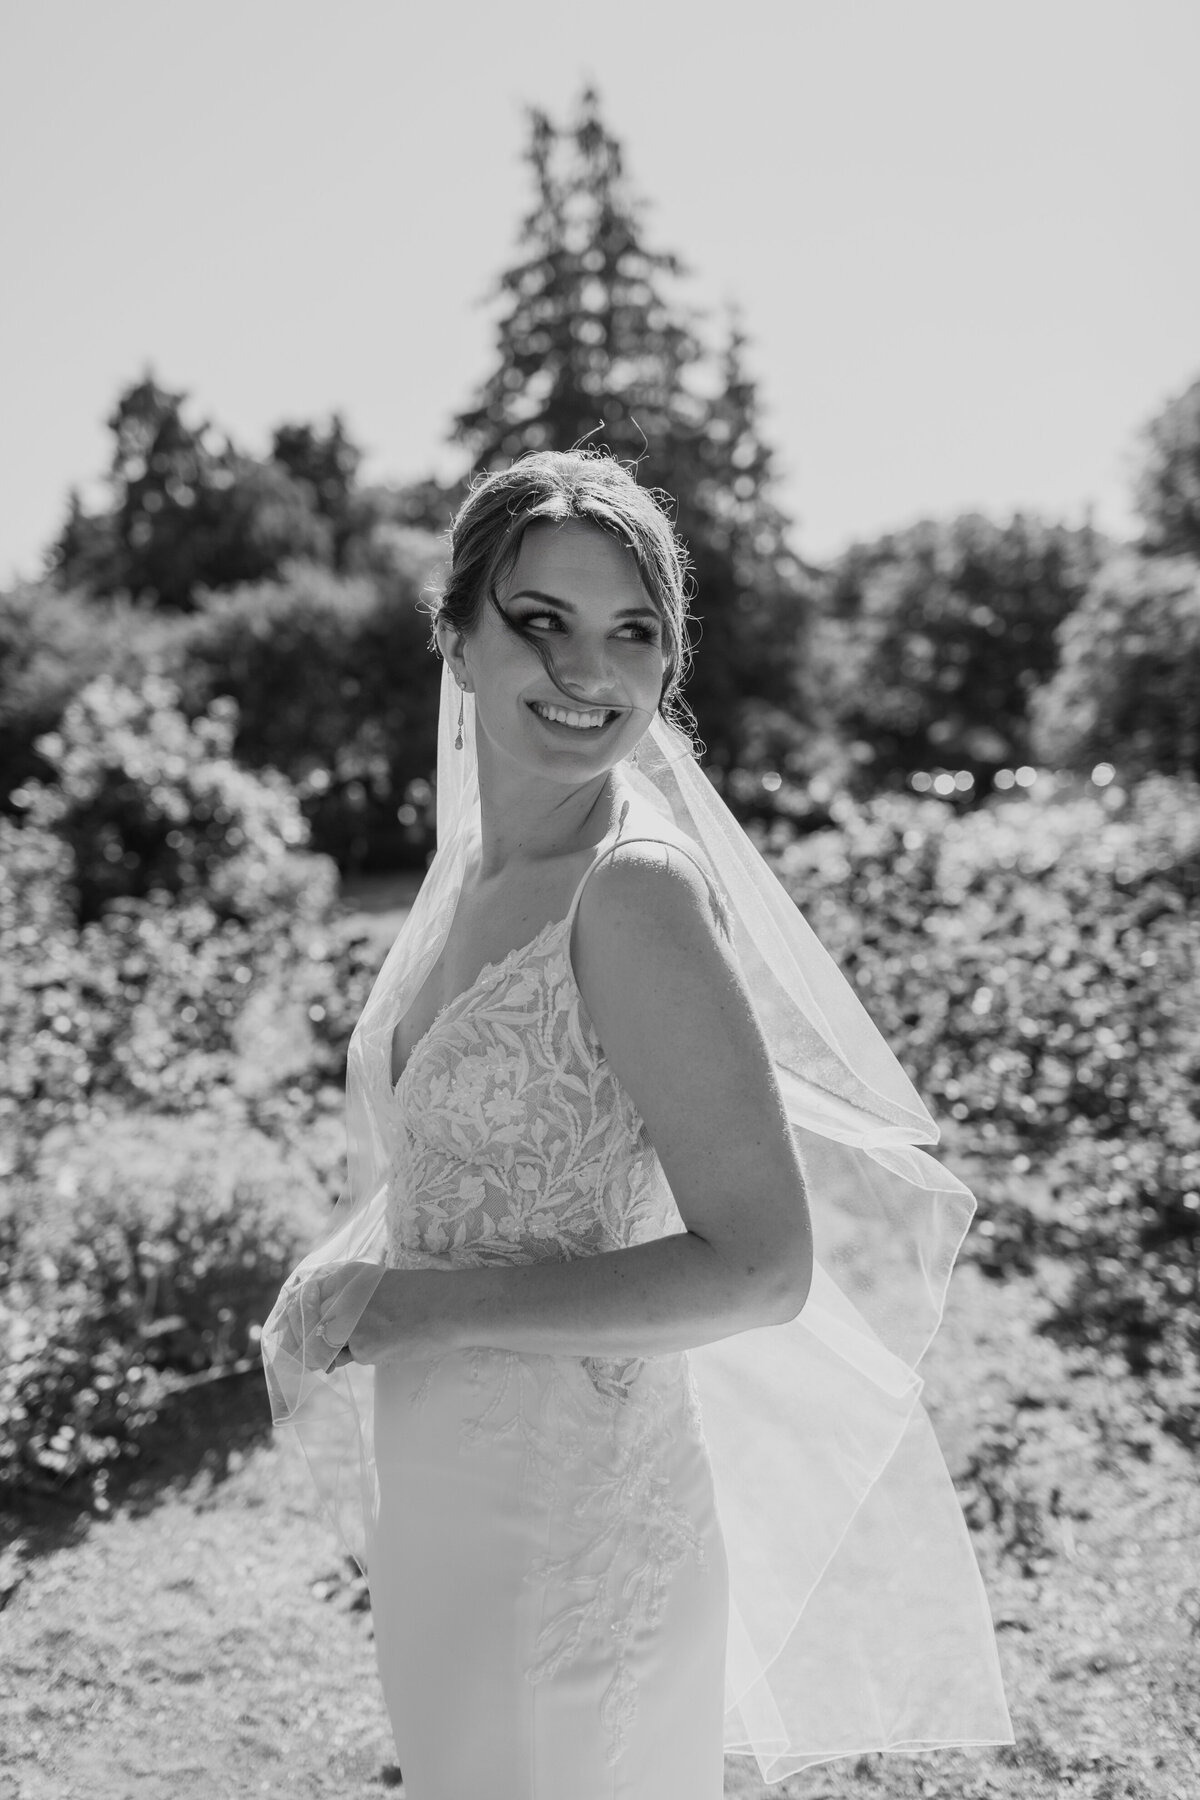 A stunning black & white portrait of a bride at the Woodland Park Zoo Rose Garden in Seattle. Captured by Fort Worth Wedding Photographer, Megan Christine Studio